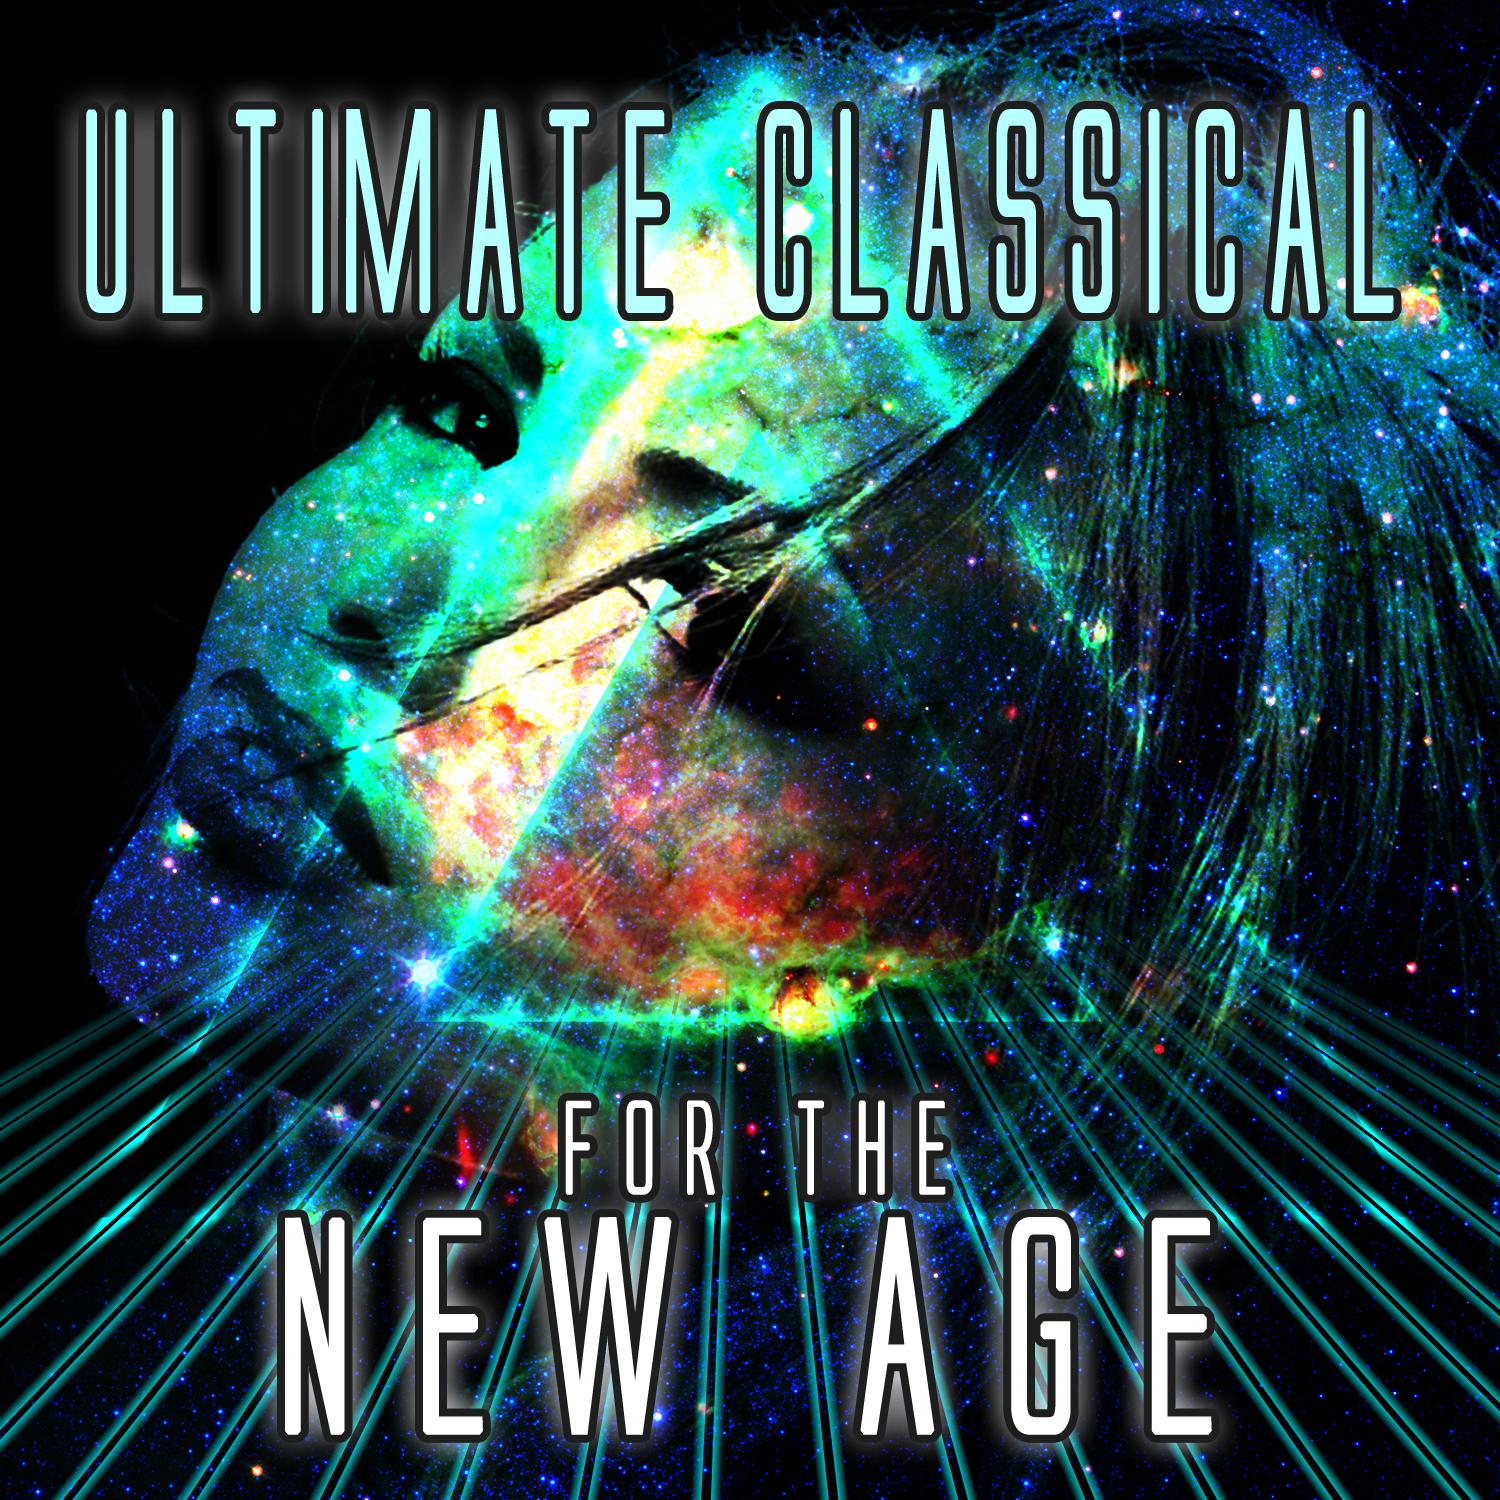 Ultimate Classical for the New Age